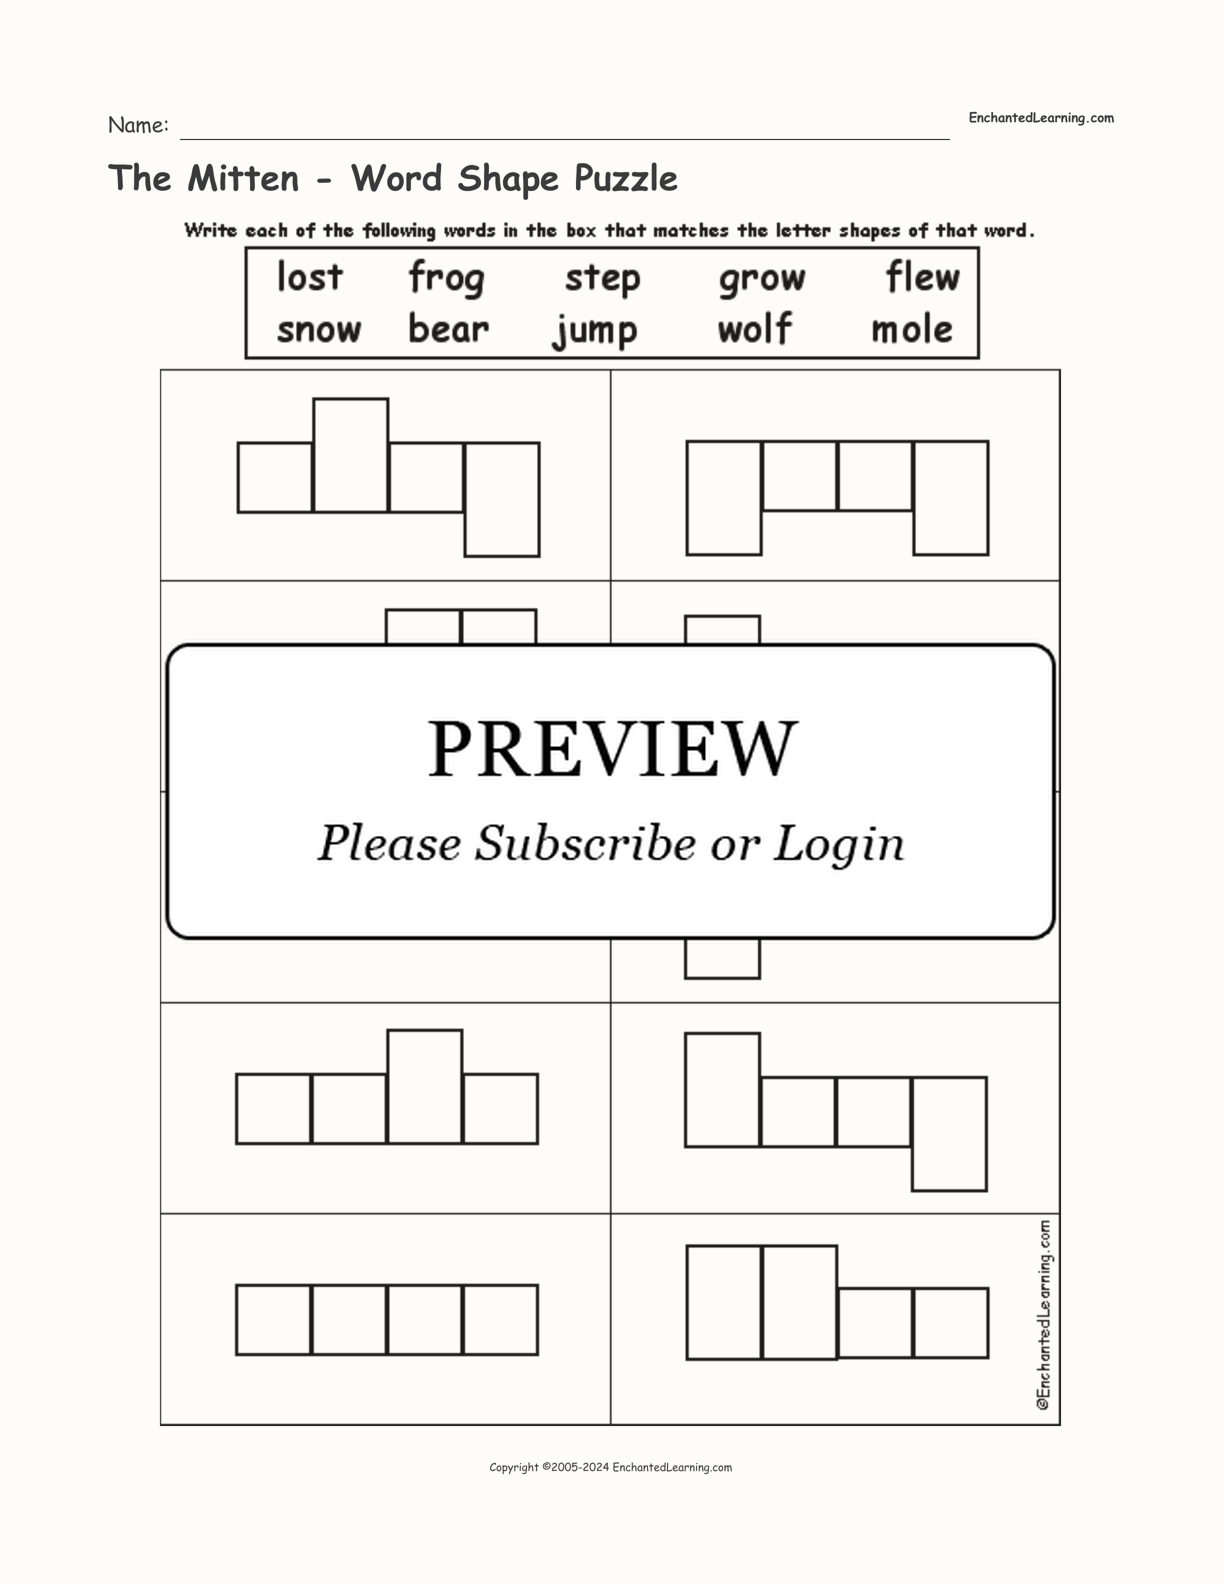 The Mitten - Word Shape Puzzle interactive worksheet page 1